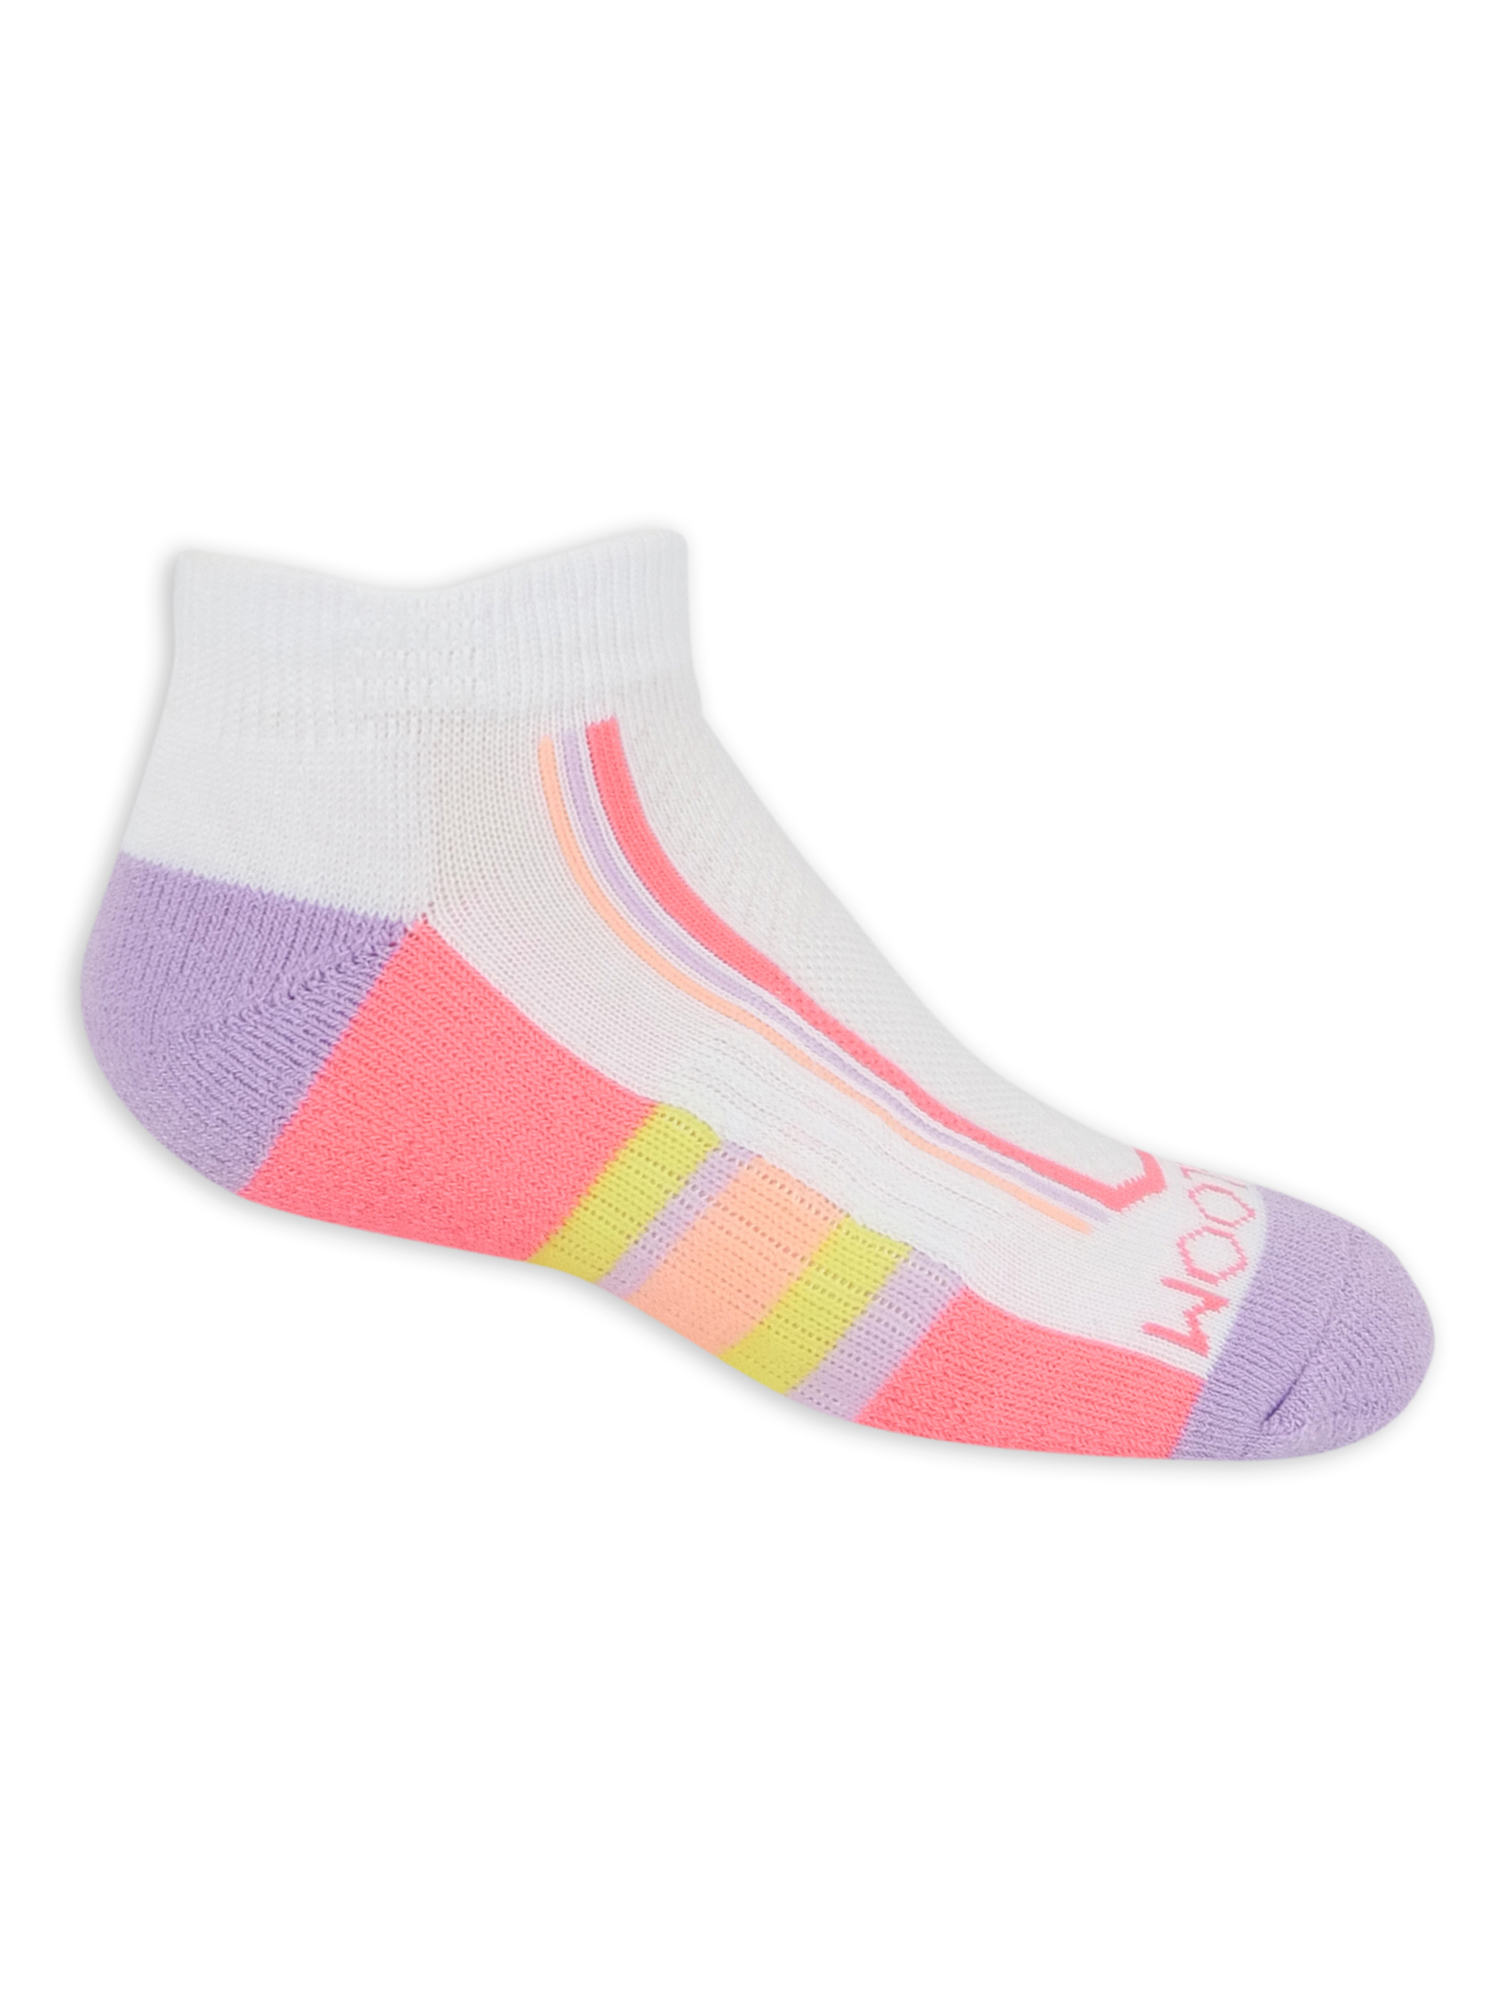 Fruit of the Loom Girls Athletic Low Cut Socks 12-Pack, Sizes S-L - image 3 of 5